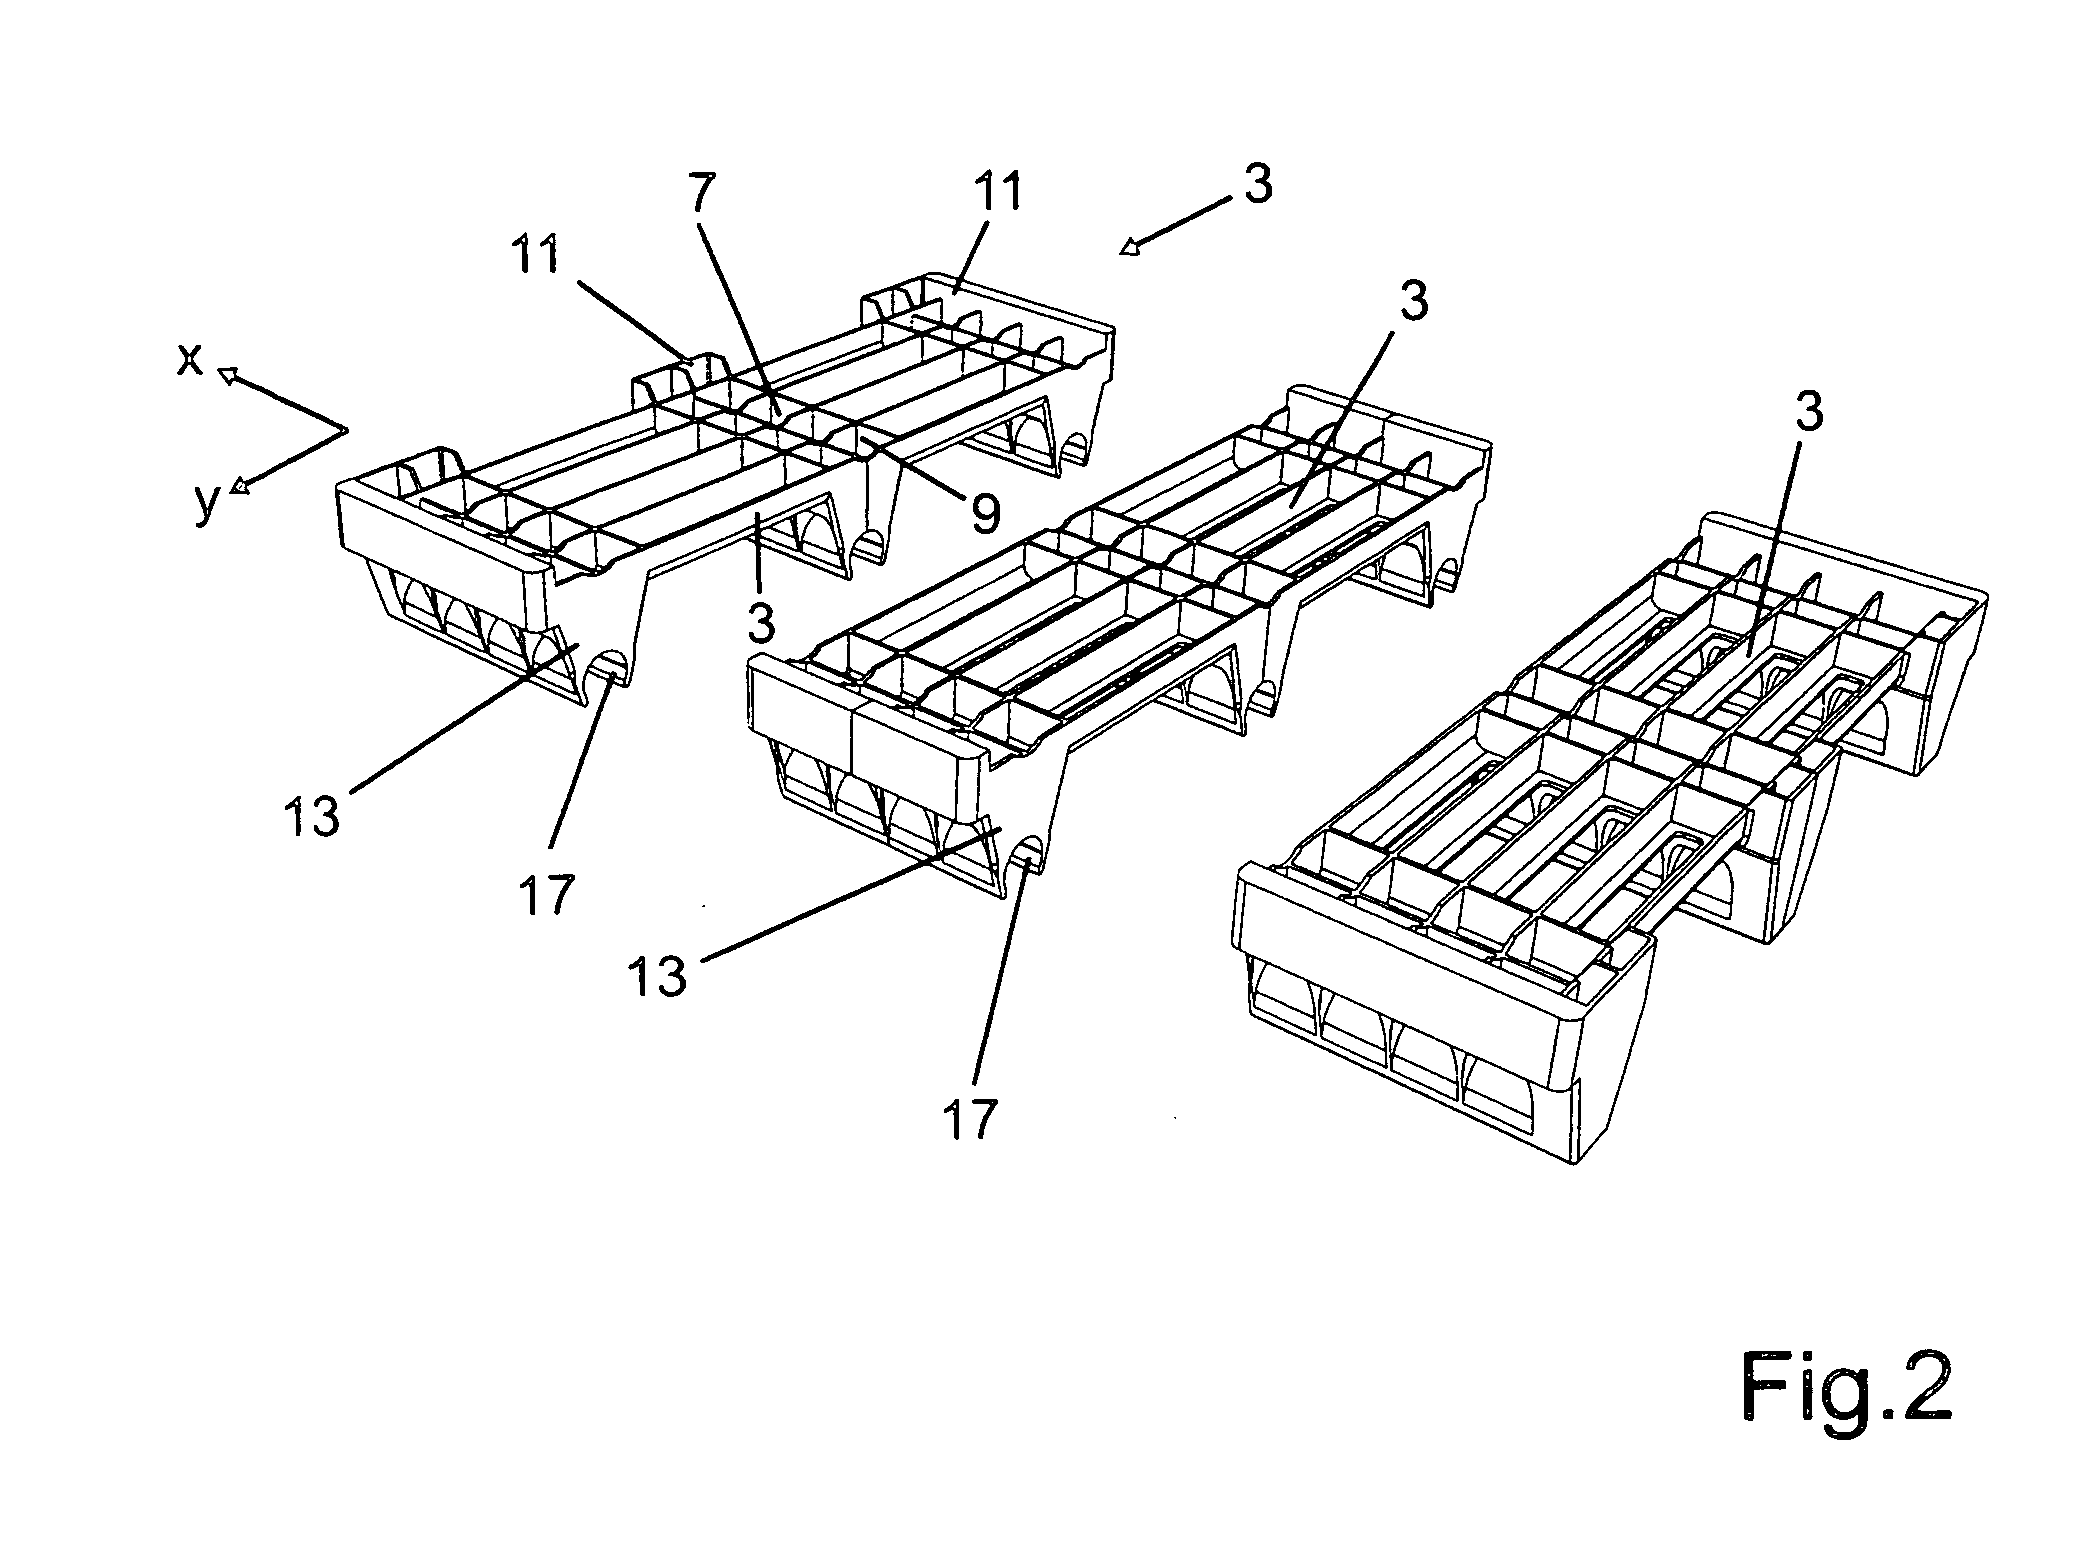 Shuttle Pallet for a Storage System